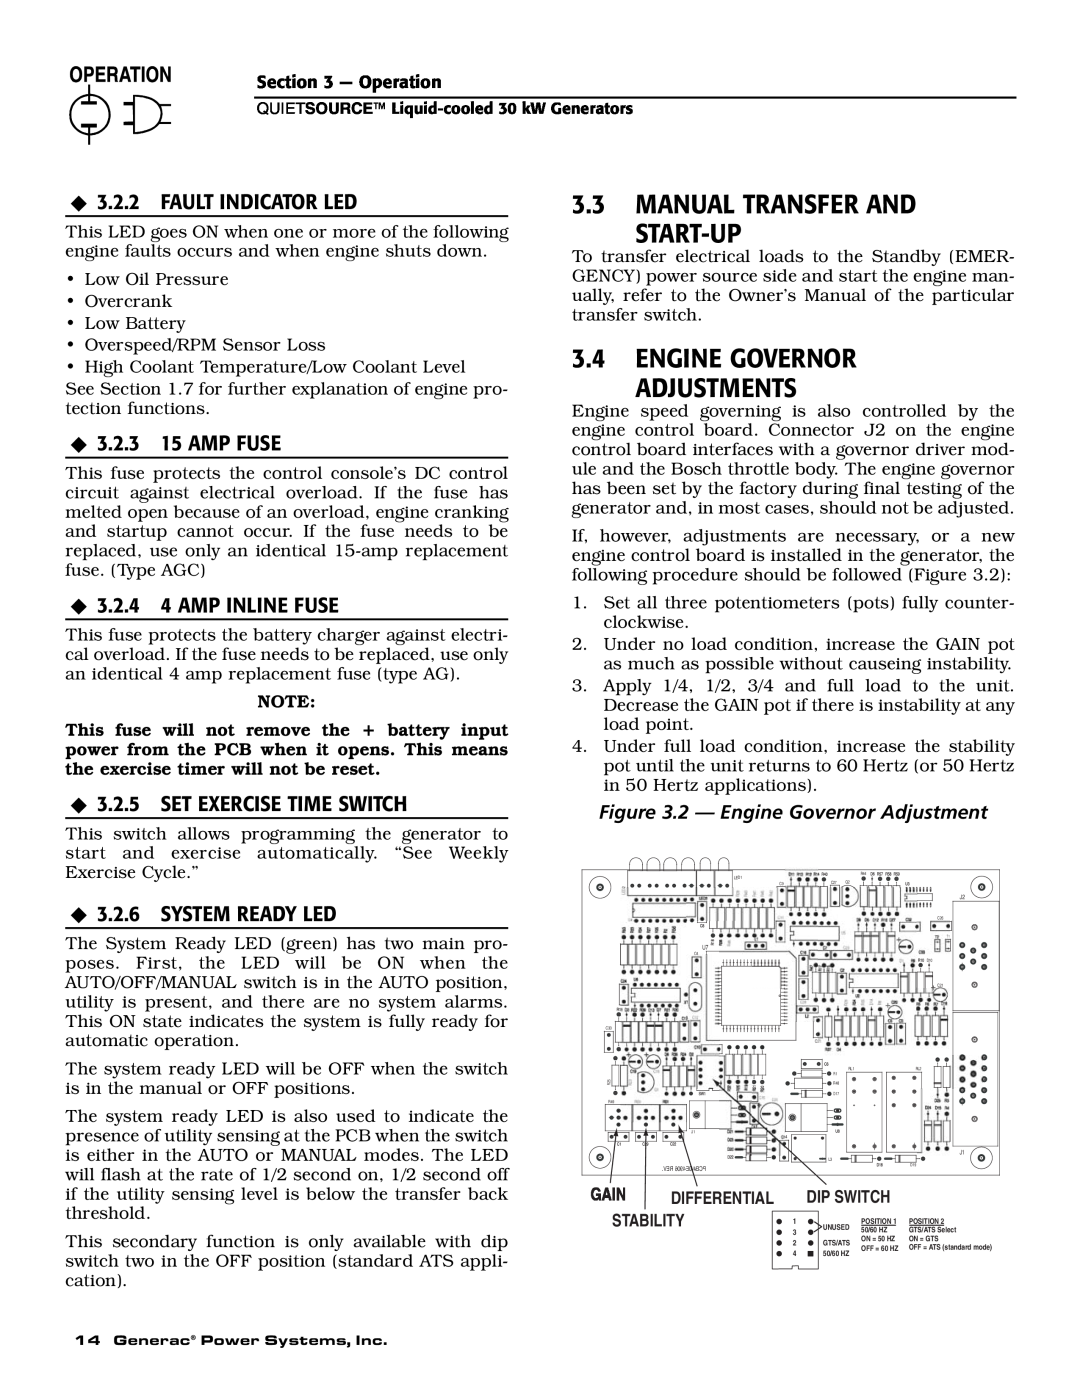 Generac Power Systems 004917-3 3.3MANUAL TRANSFER AND START-UP, 3.4ENGINE GOVERNOR ADJUSTMENTS, ‹3.2.2 FAULT INDICATOR LED 